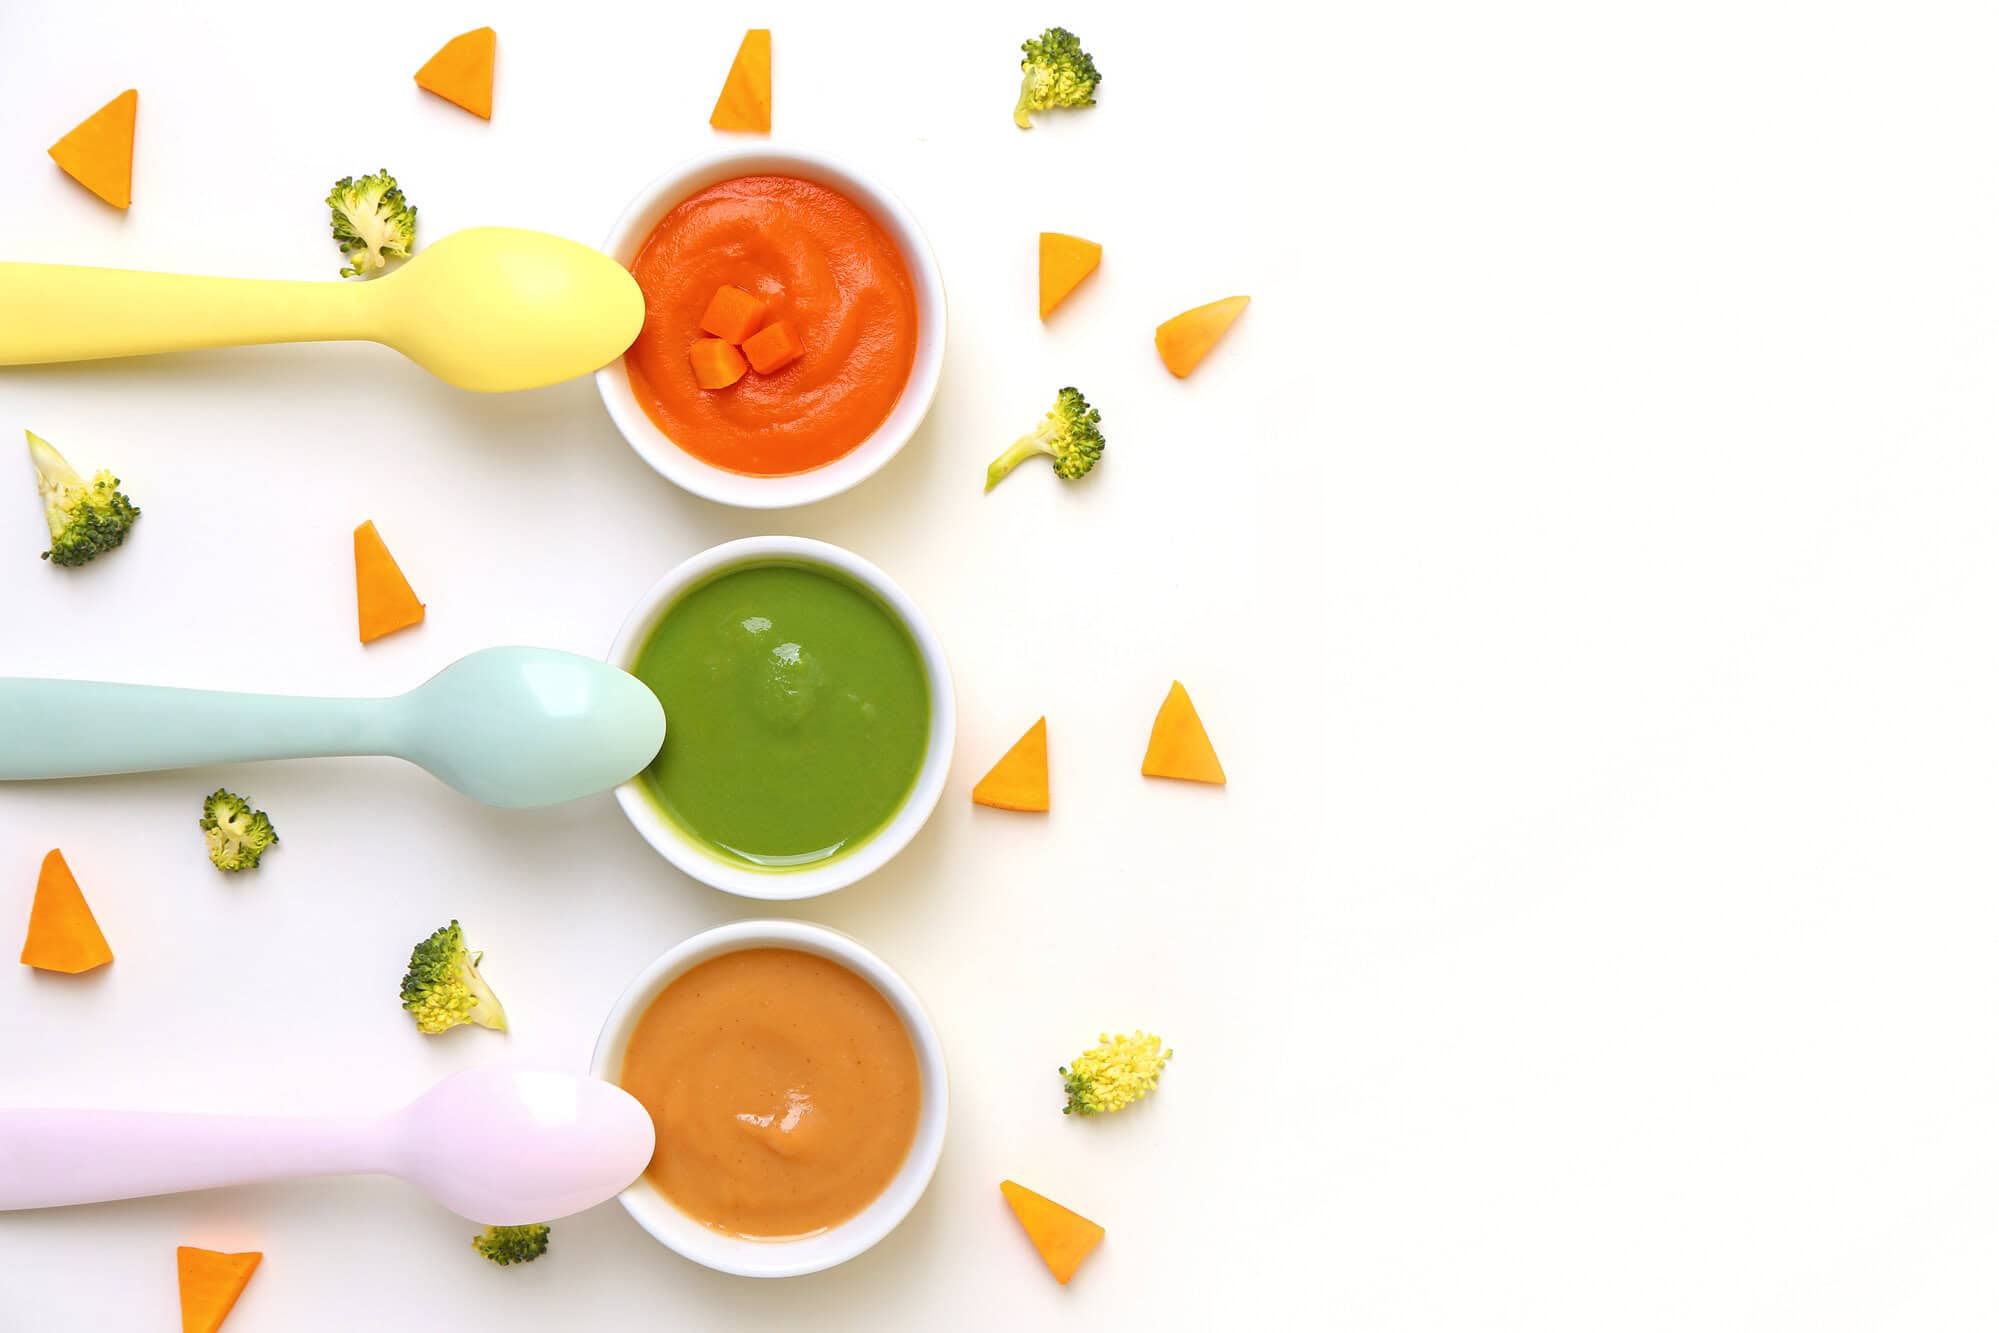 Composition with bowls of healthy baby puree and cut vegetables on white background